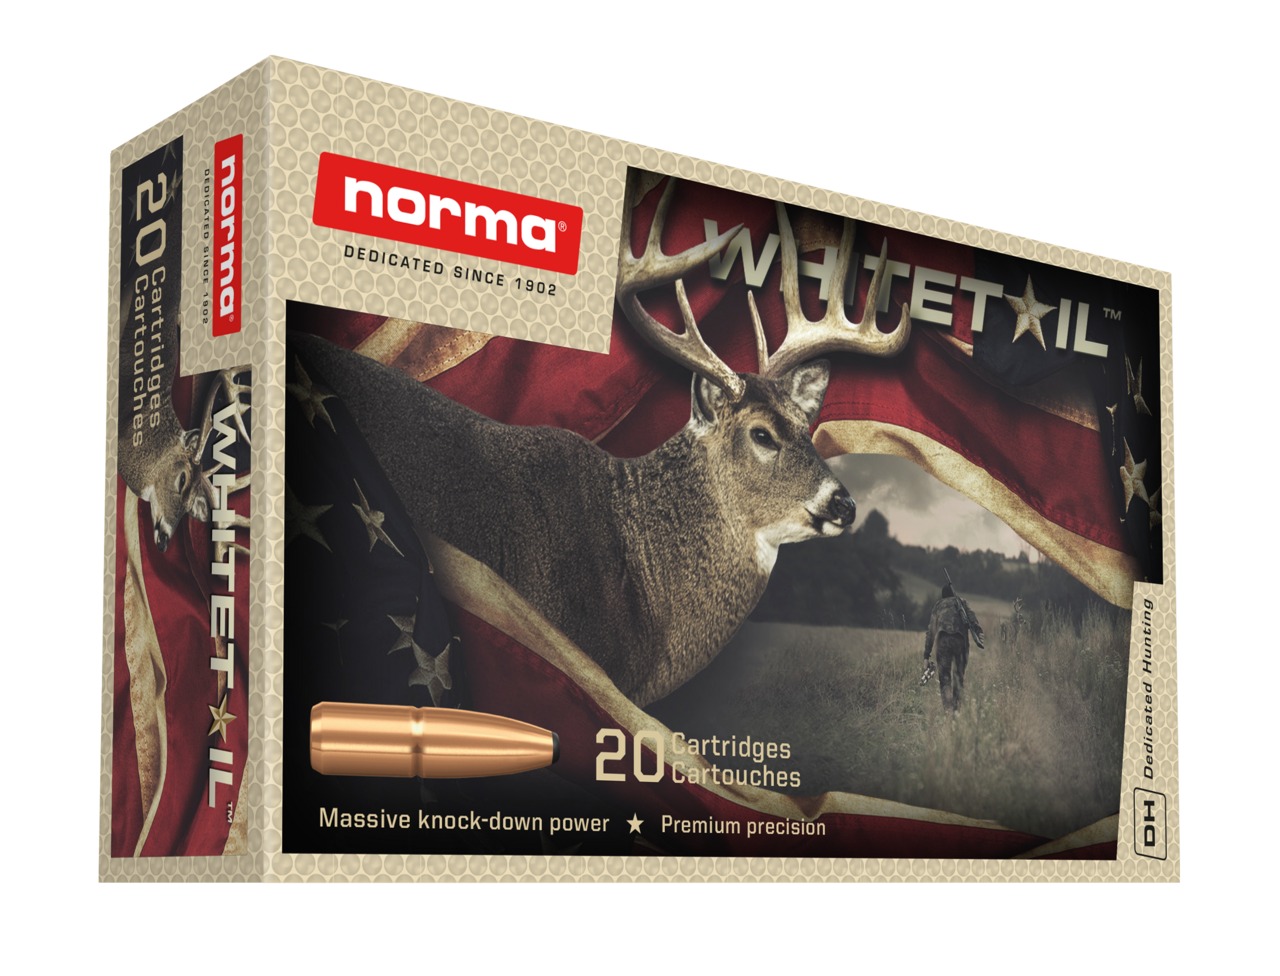 CART NORMA 7MMRM 150GR WHITETAIL BTE 20 ref 20171512 NORMA